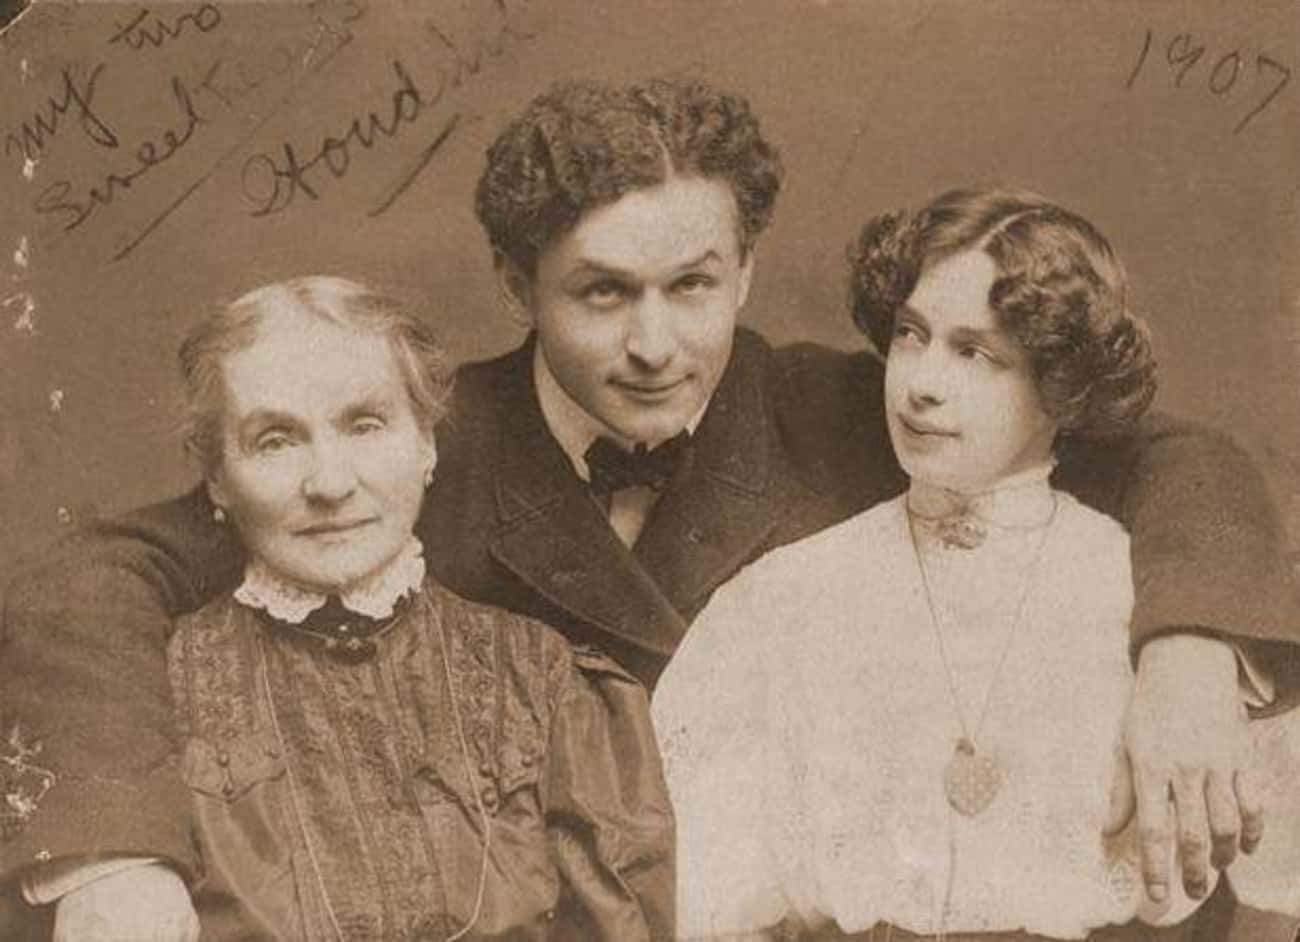 Houdini’s Fascination With Spiritualism Allegedly Stemmed From His Genuine Desire To Contact His Deceased Mother